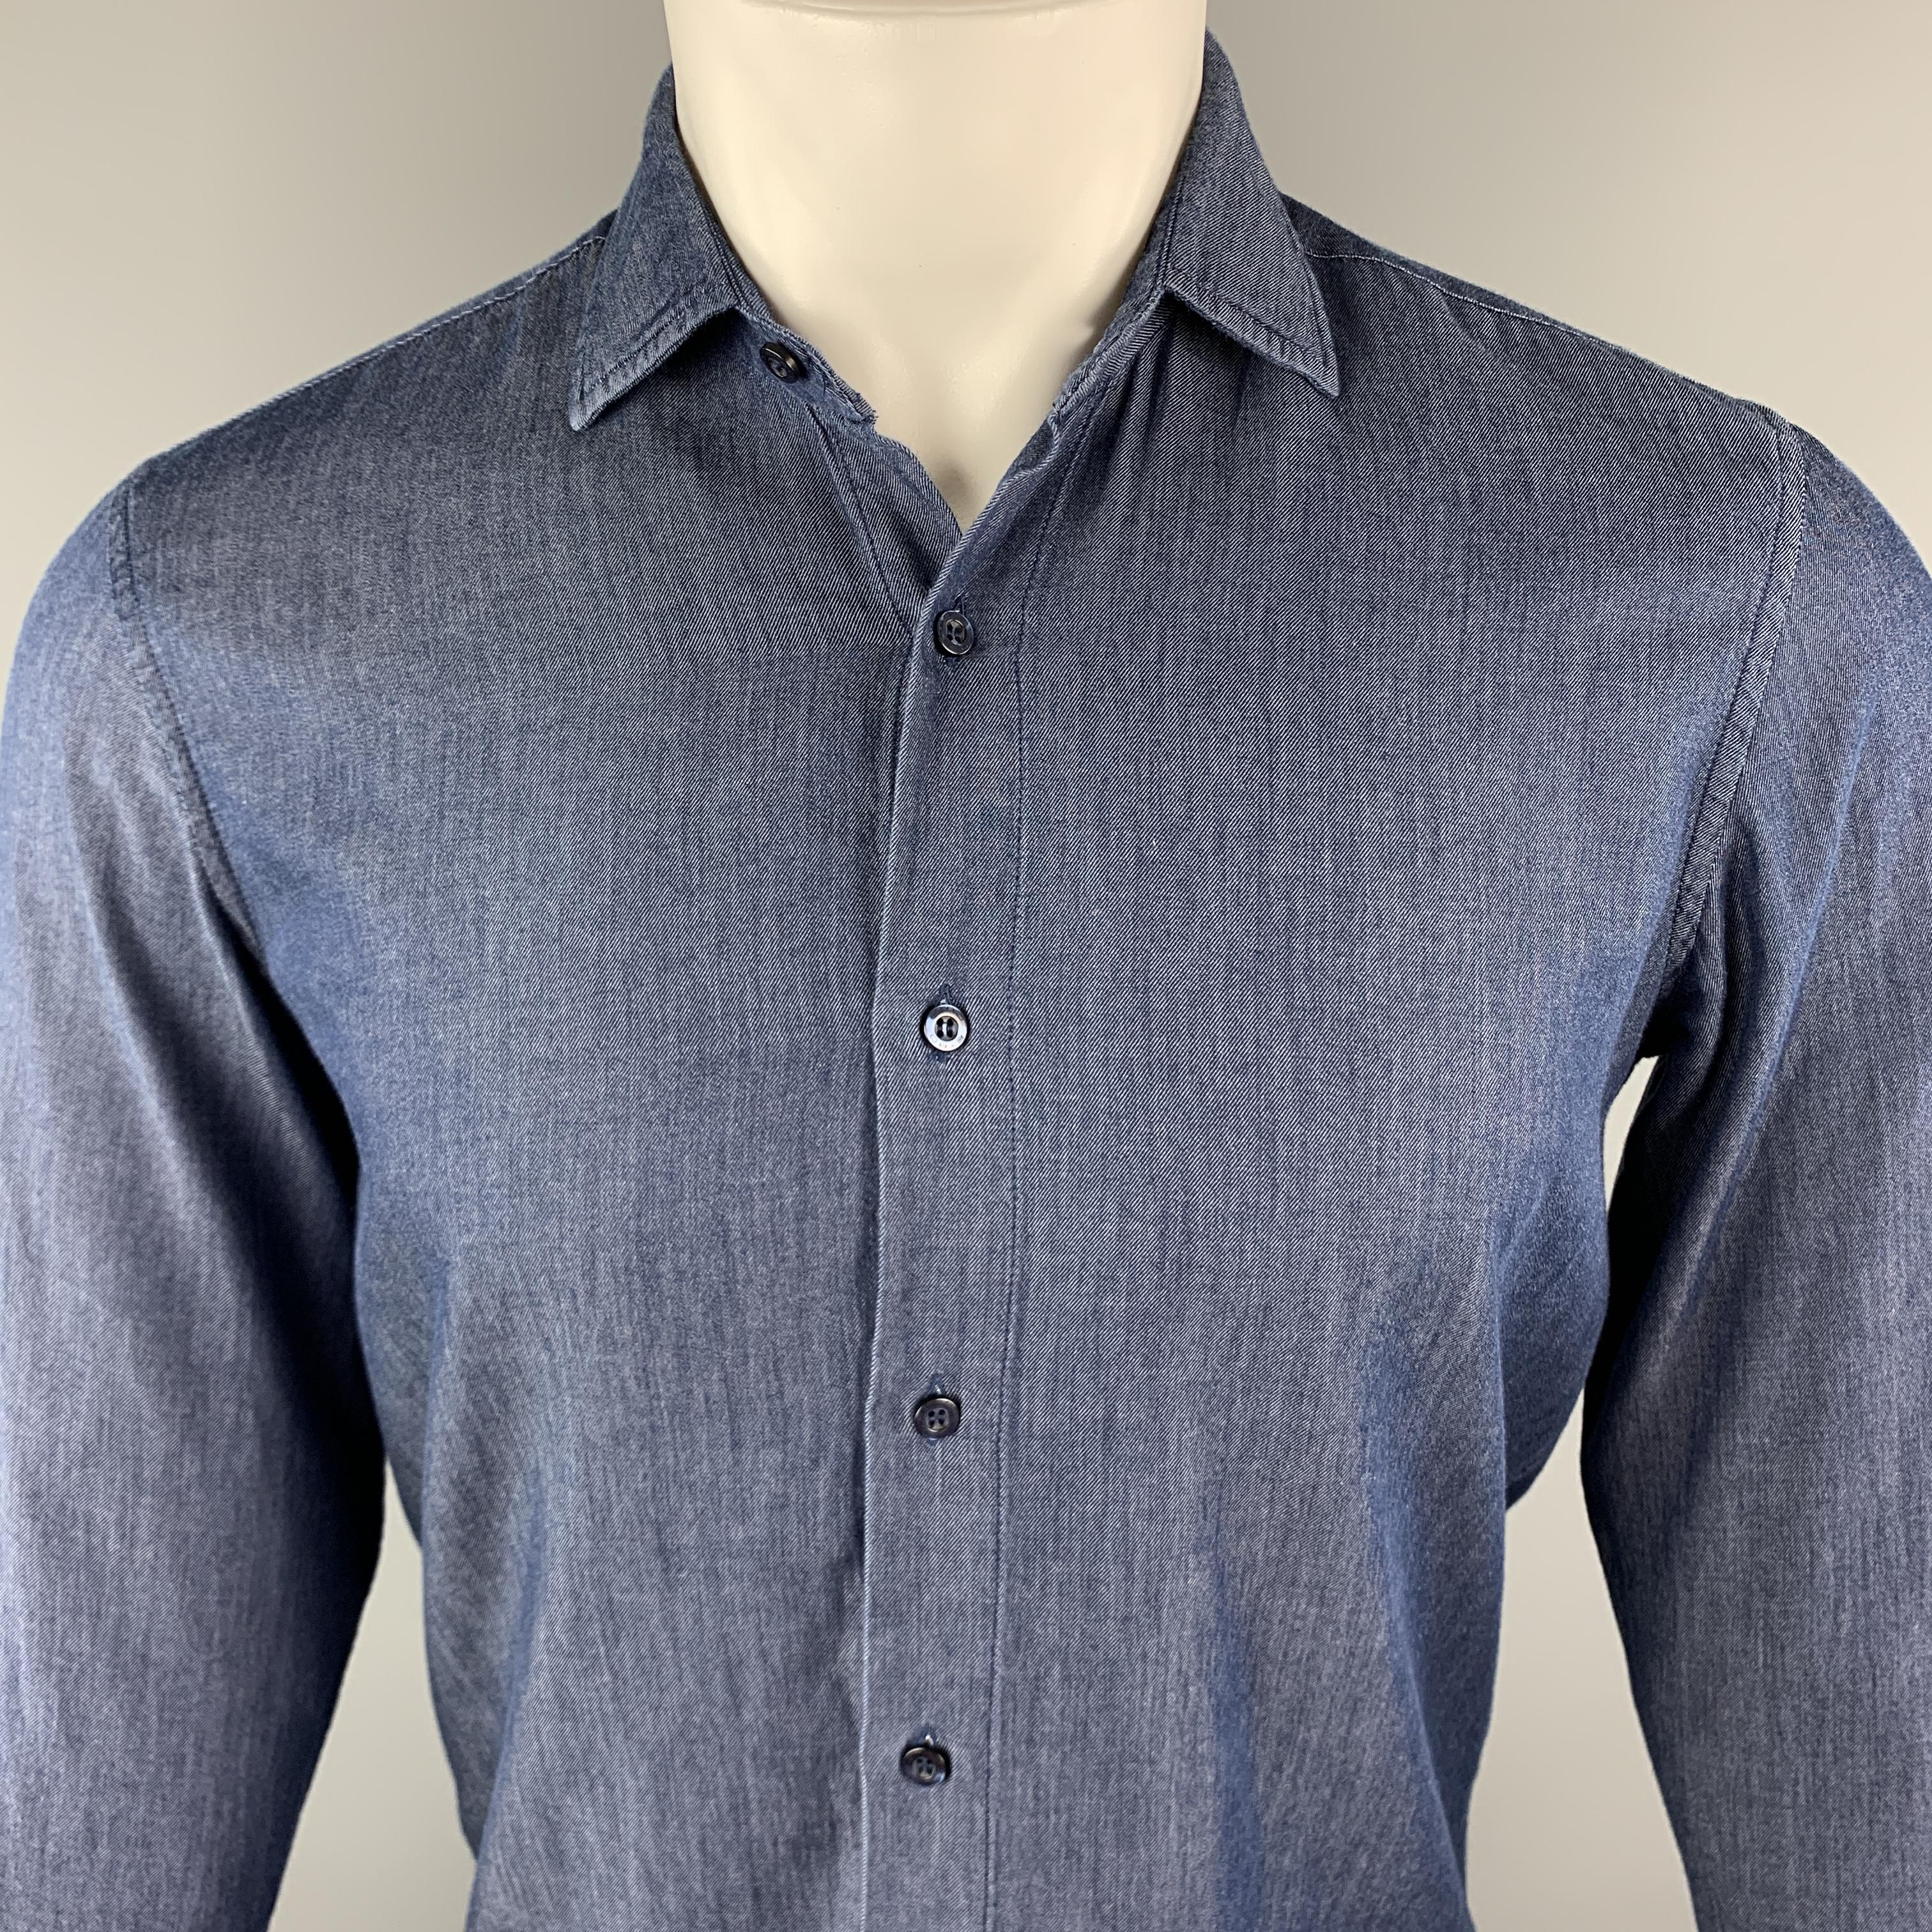 ETRO Long Sleeve Shirt comes in an indigo tone in a solid cotton material, featuring a button up style and a spread collar, with buttoned cuffs. Made in Italy.

Excellent Pre-Owned Condition.
Marked: S

Measurements:

Shoulder: 16 in. 
Chest: 40 in.